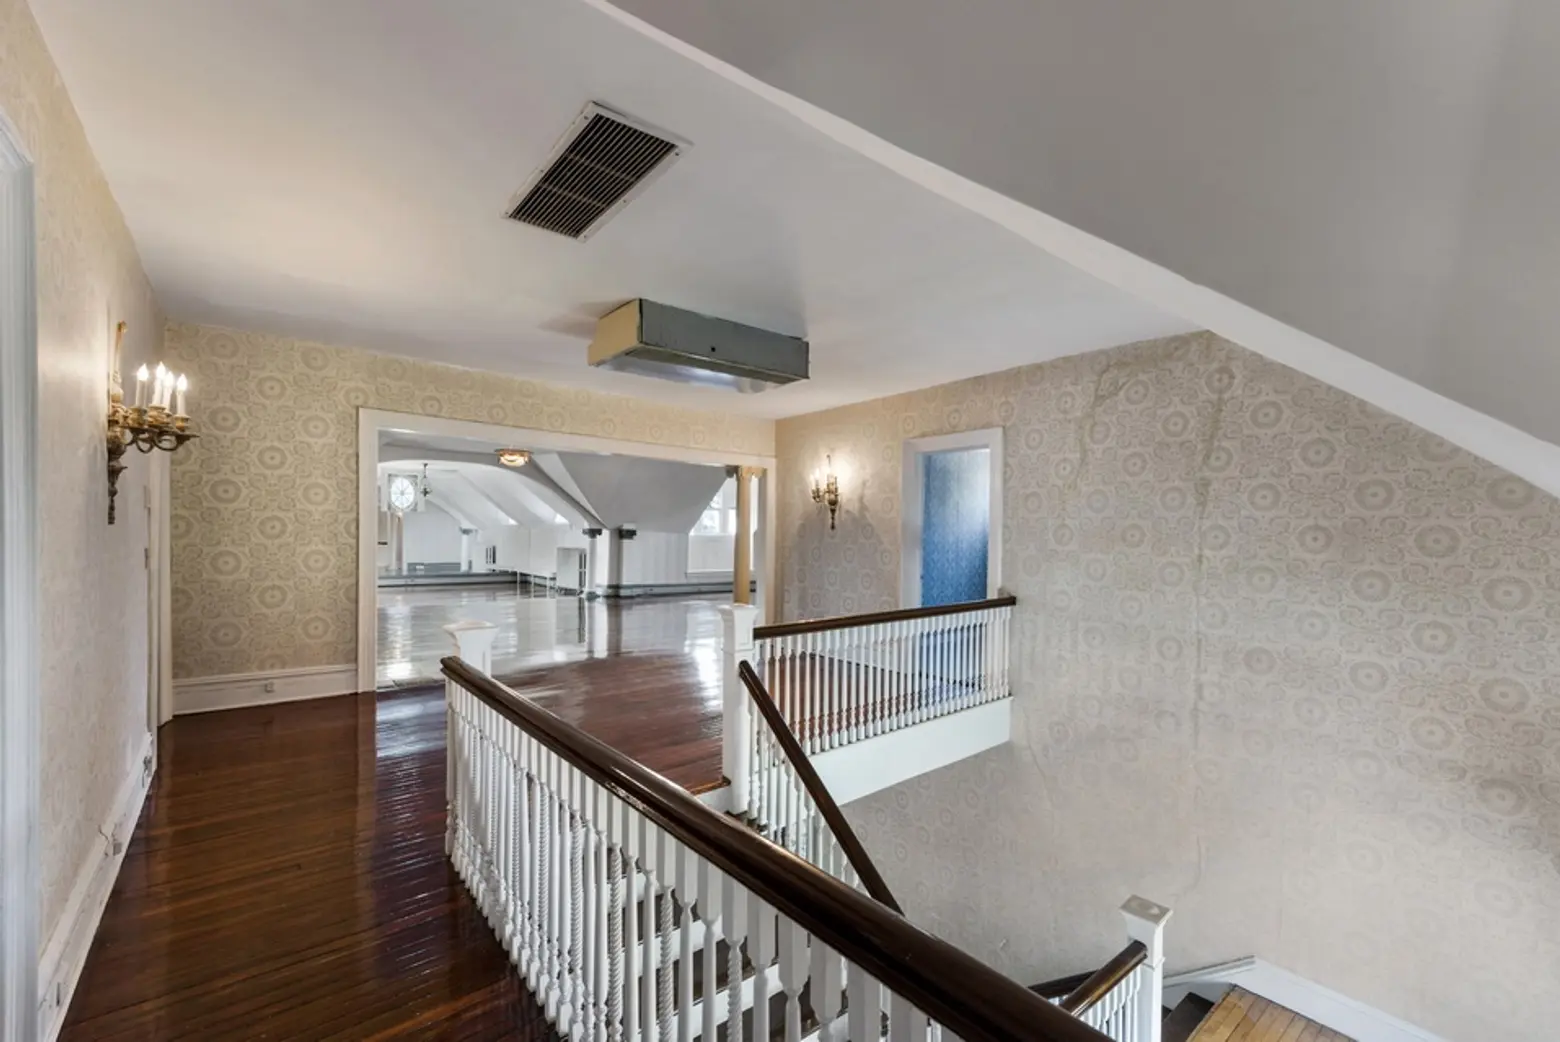 1305 Albermarle Road, Prospect Park South, Michelle Williams, Brooklyn, Brooklyn Townhouse, Historic Home, Townhouses, Record Brooklyn Prices, cool listings